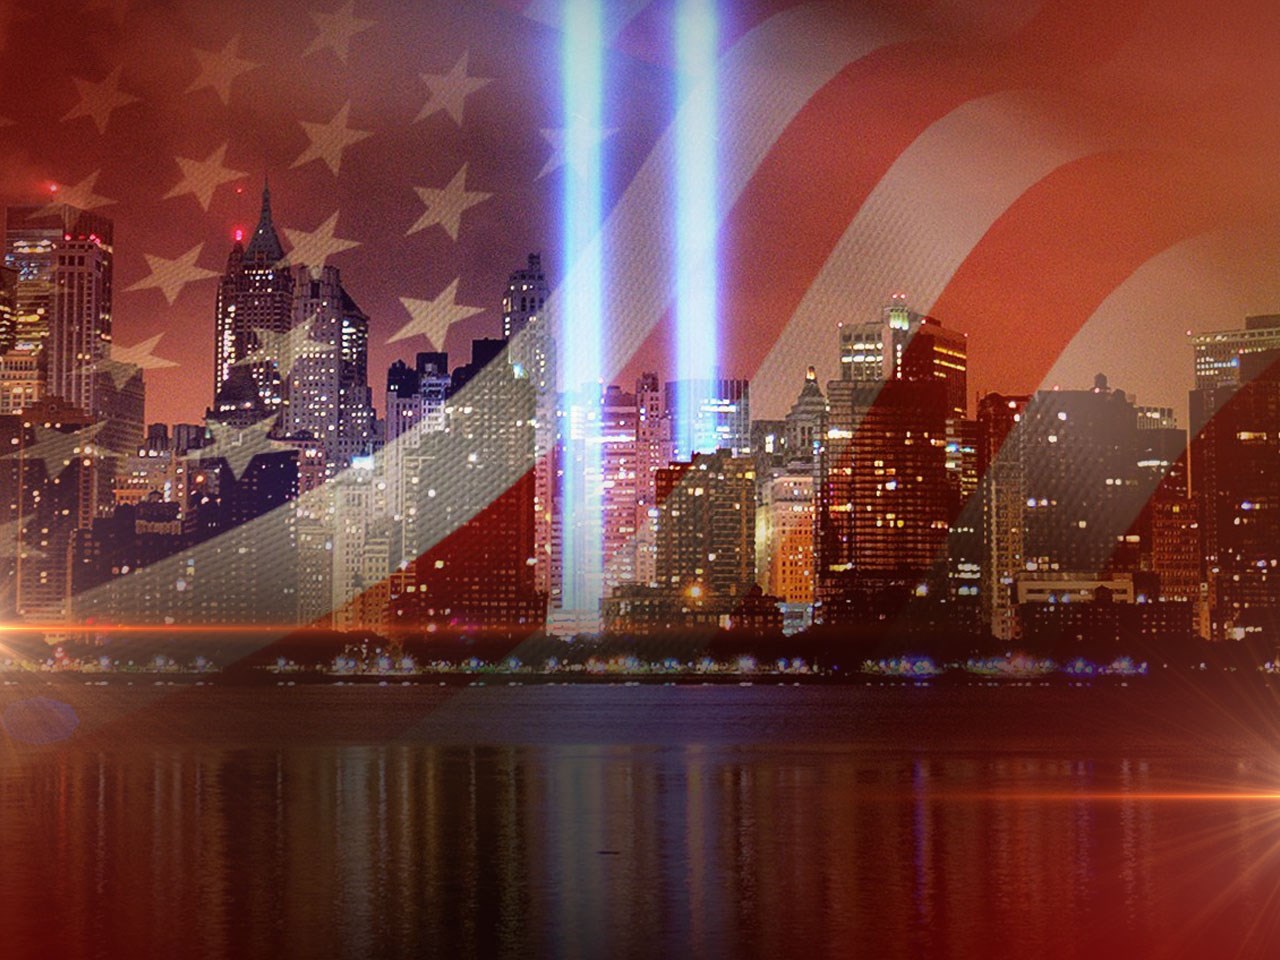 Temple firefighters to hold 9/11 memorial service